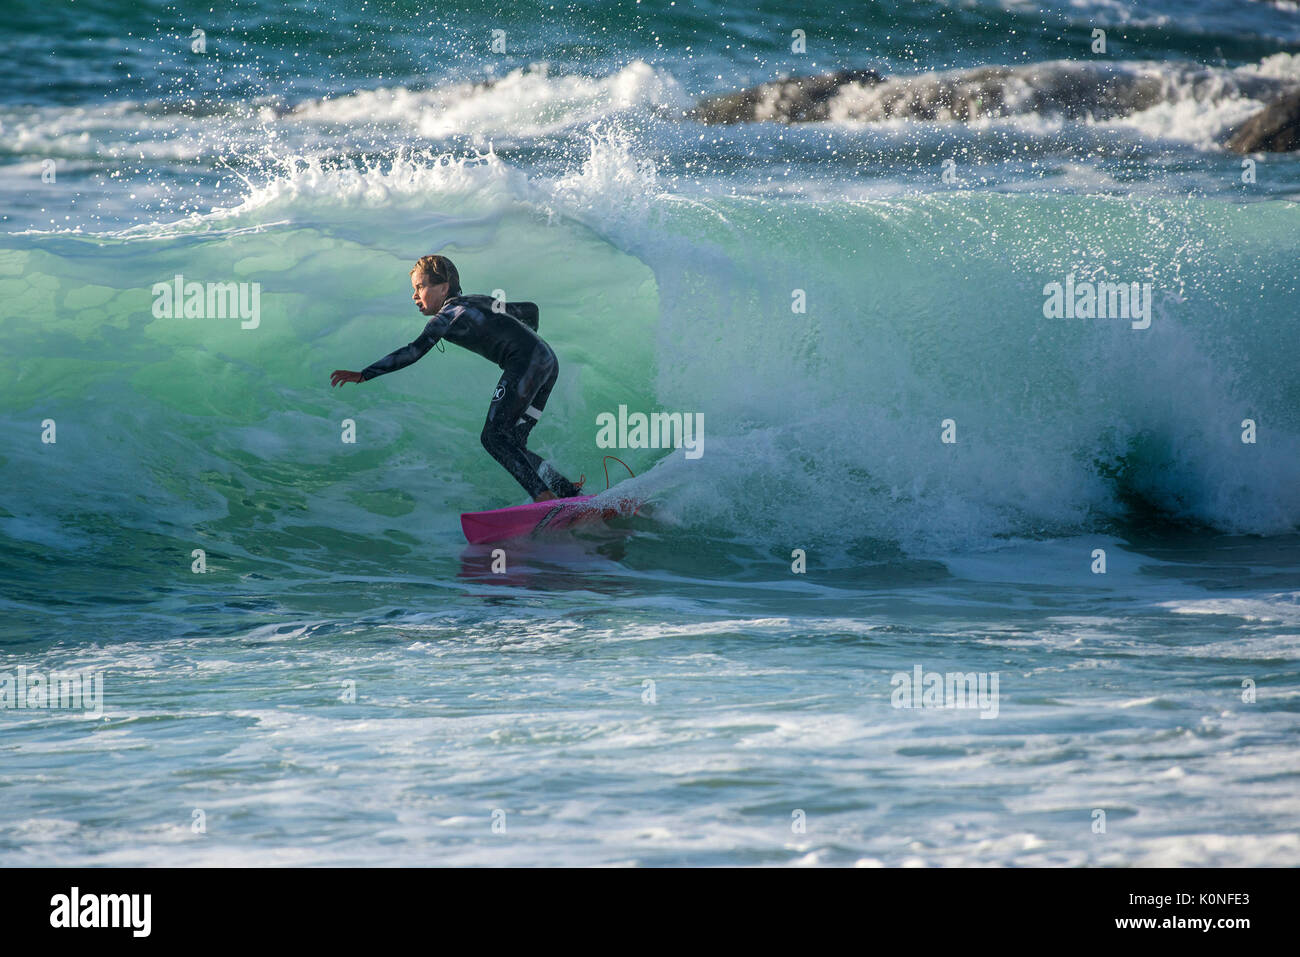 Surfing UK - A surfer riding a wave at Fistral Cornwall UK. Stock Photo